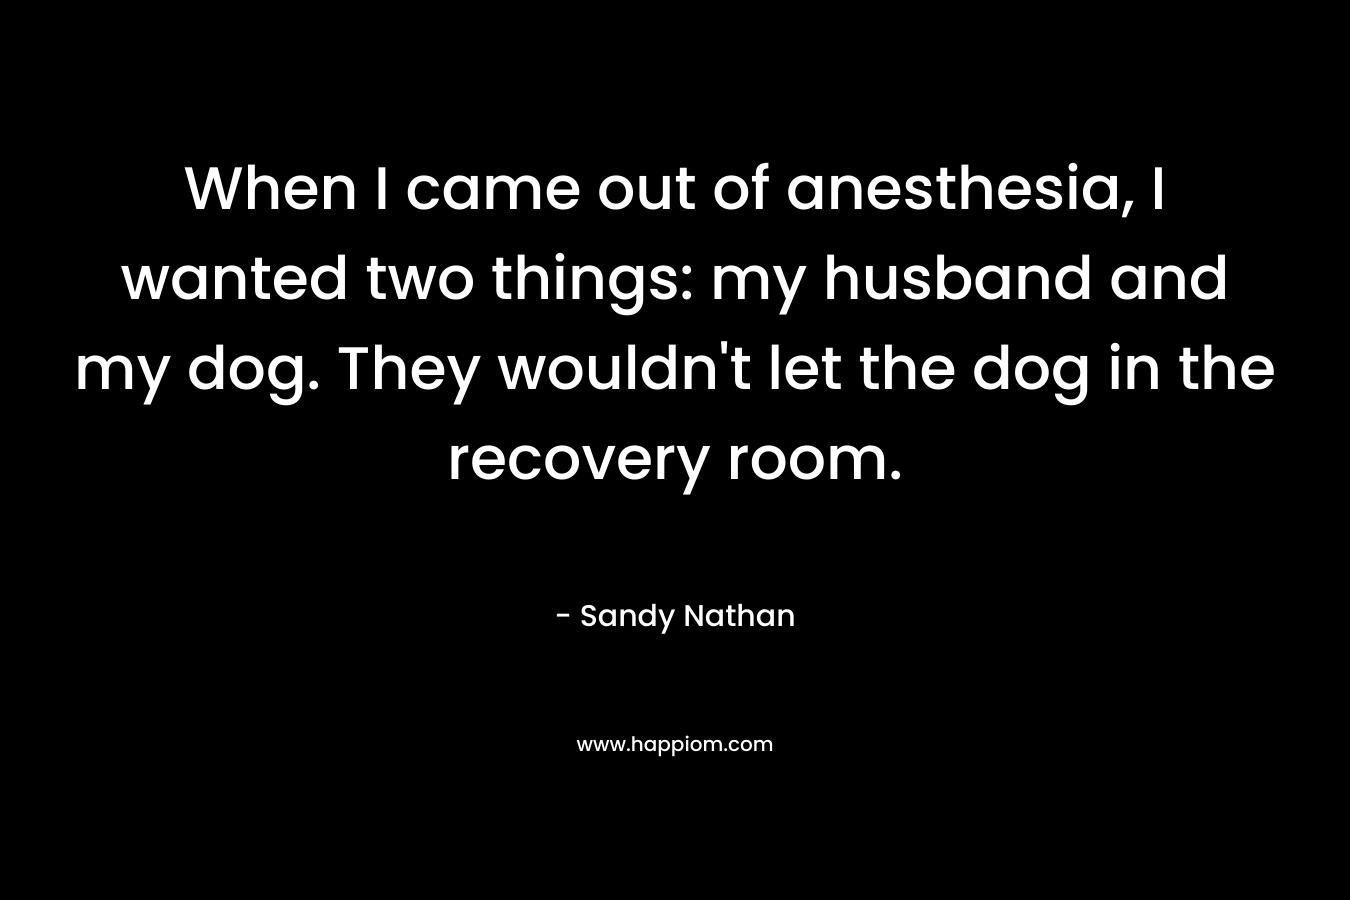 When I came out of anesthesia, I wanted two things: my husband and my dog. They wouldn't let the dog in the recovery room.